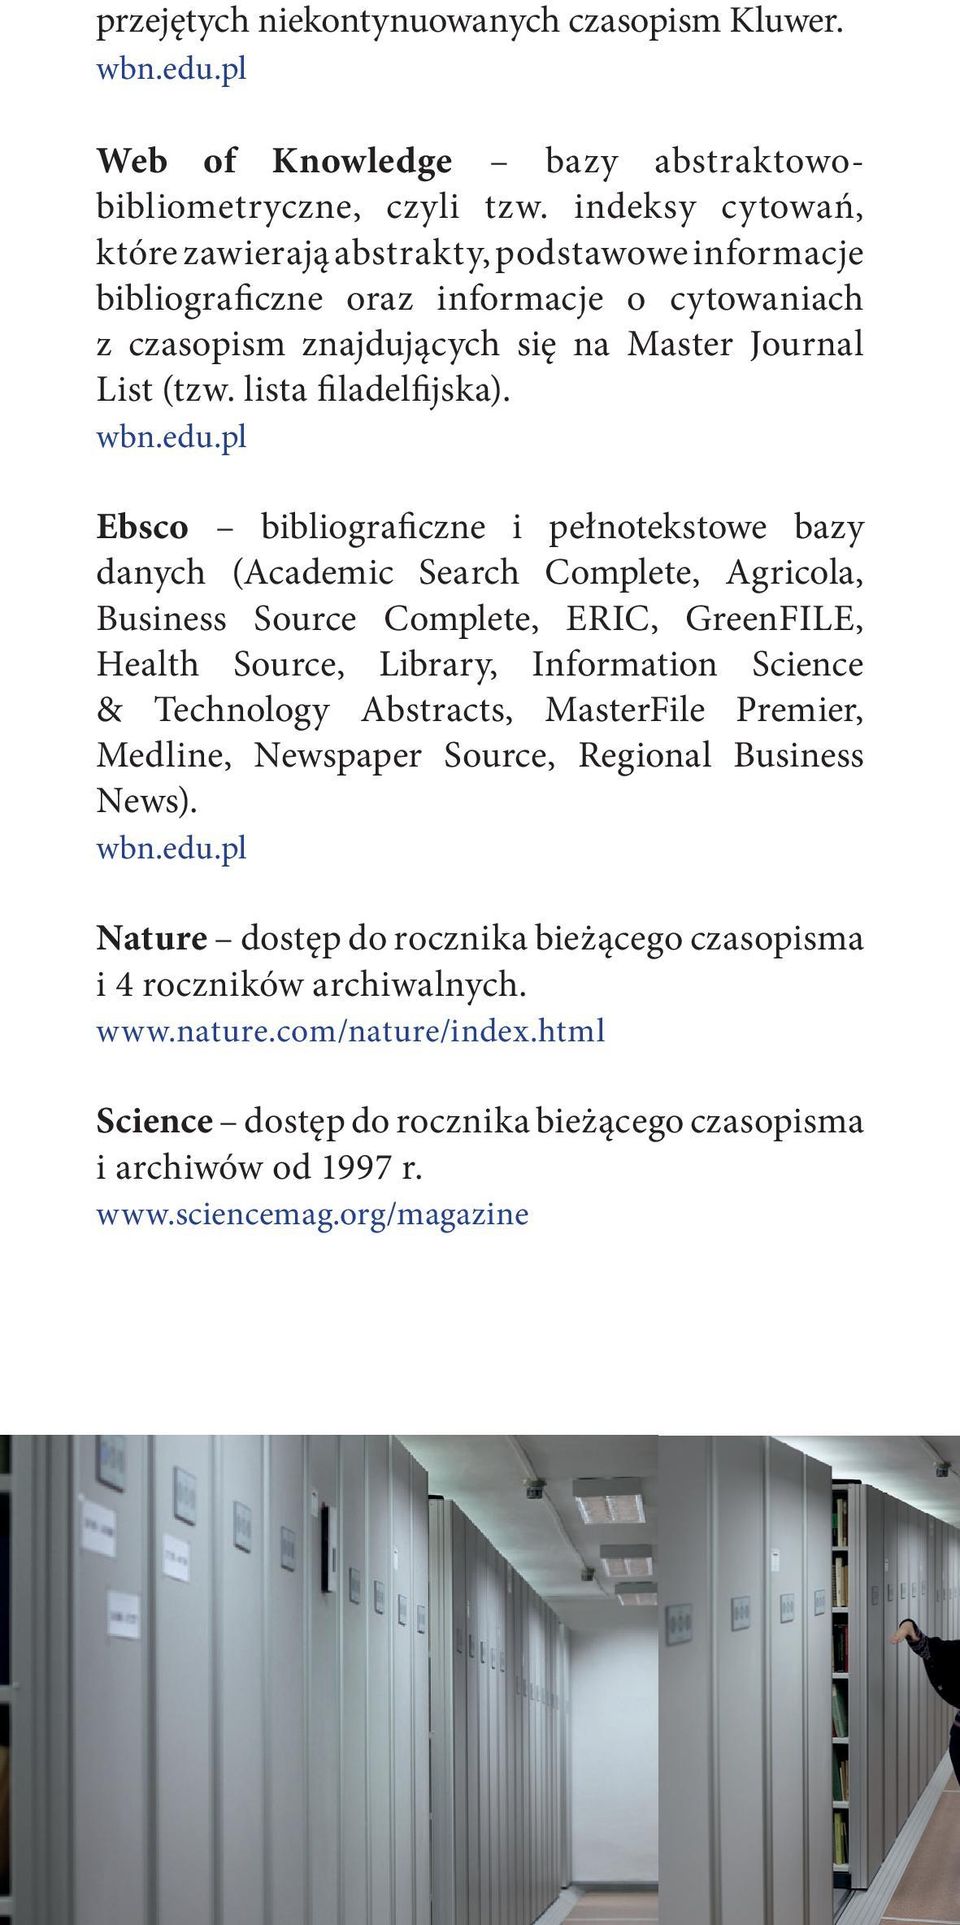 pl Ebsco bibliograficzne i pełnotekstowe bazy danych (Academic Search Complete, Agricola, Business Source Complete, ERIC, GreenFILE, Health Source, Library, Information Science & Technology